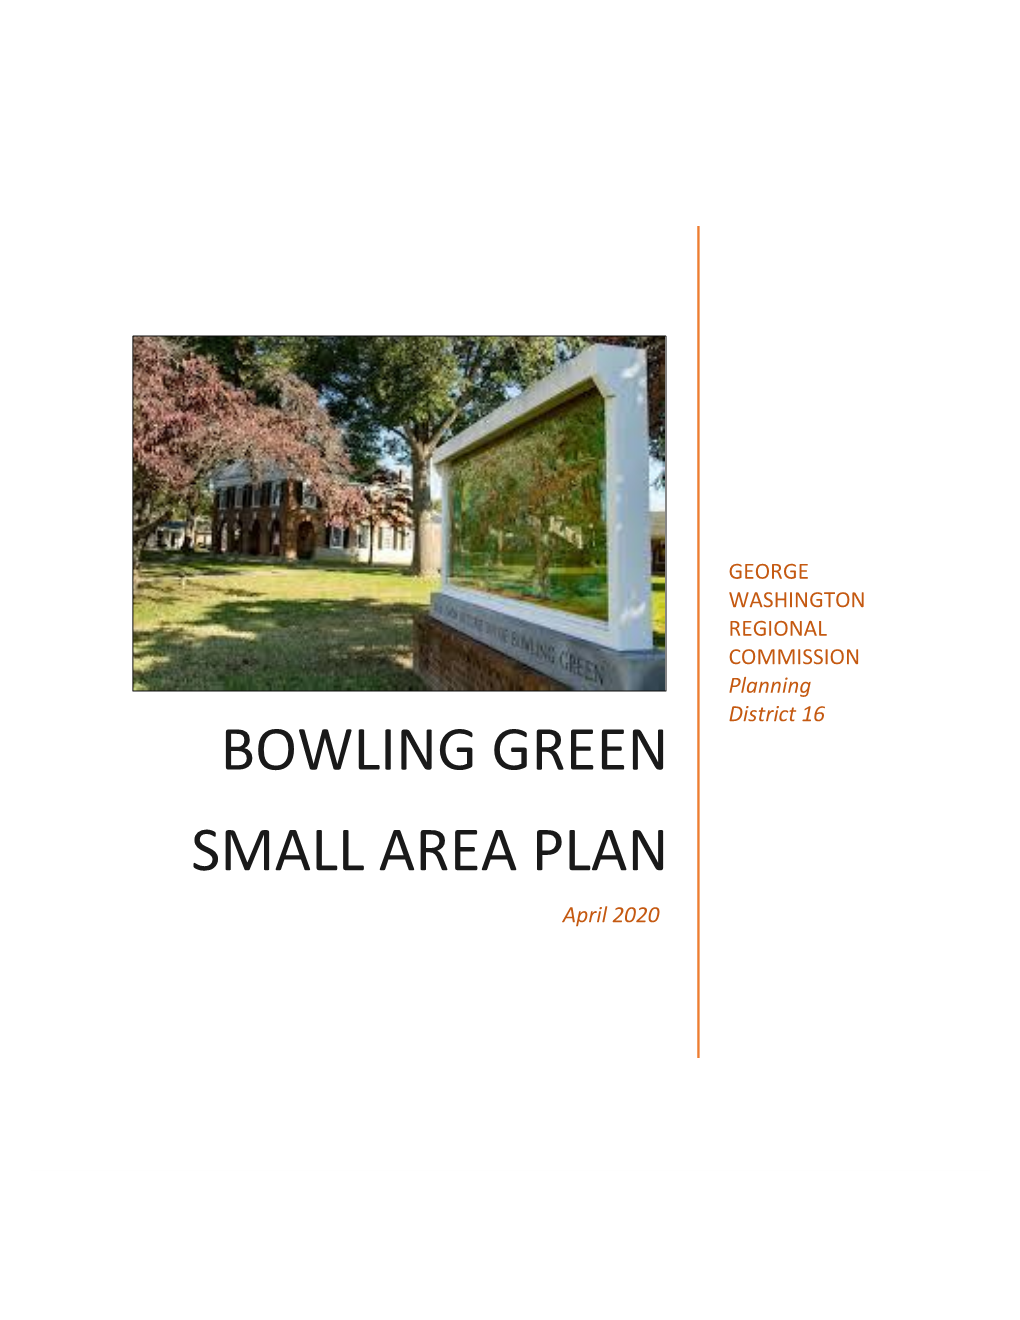 Bowling Green Small Area Plan